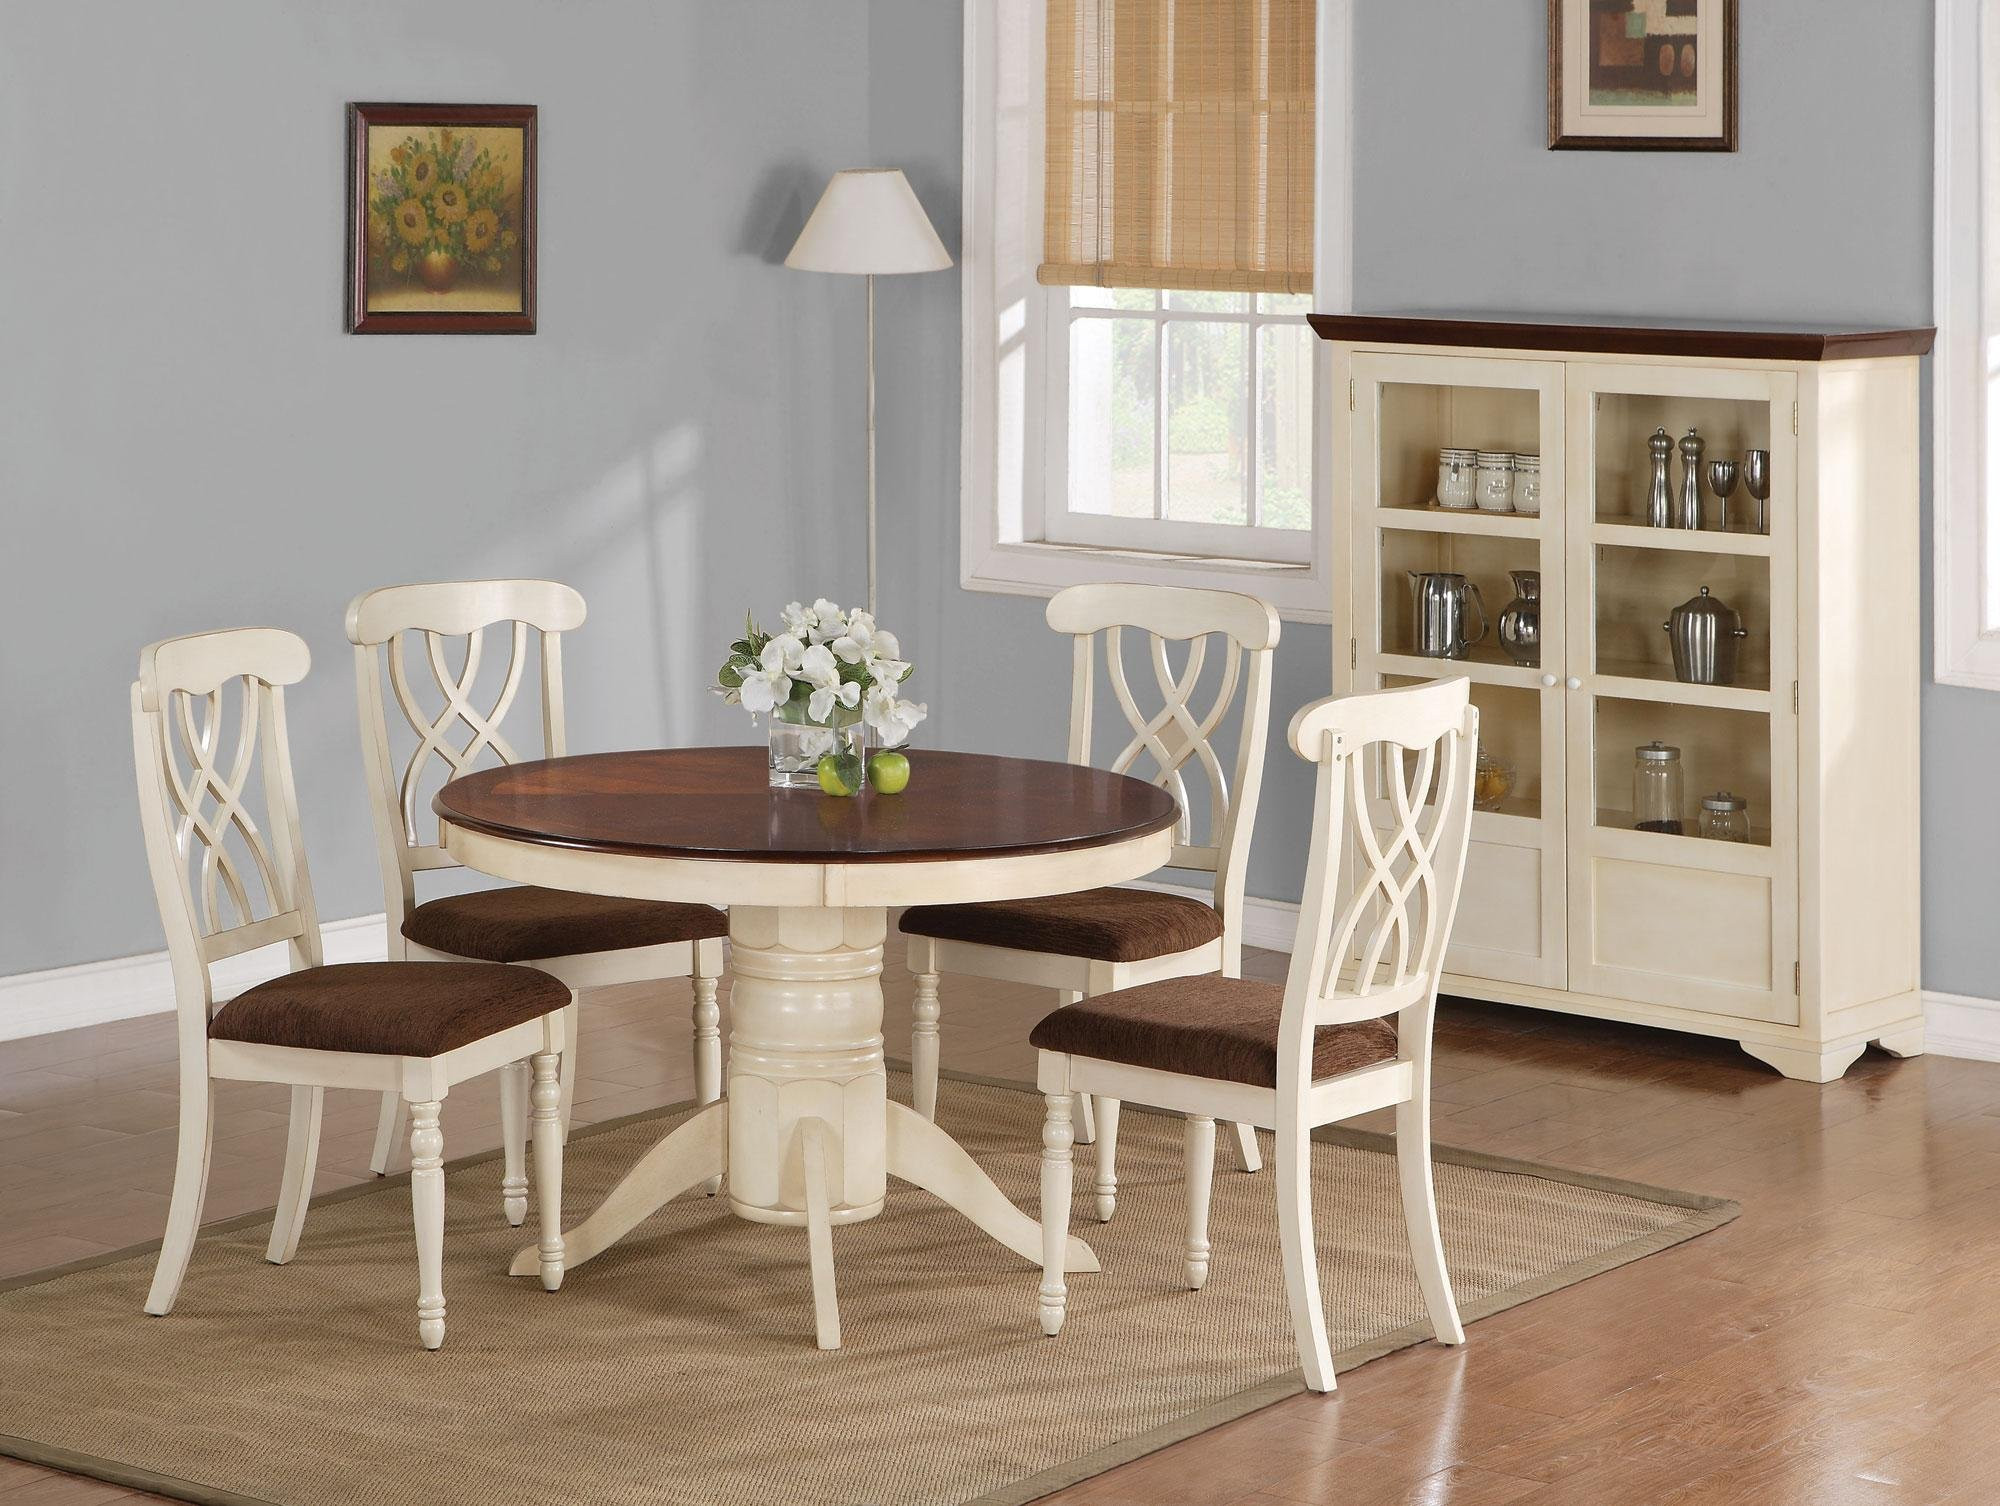 White And Wood Kitchen Table
 Beautiful White Round Kitchen Table and Chairs